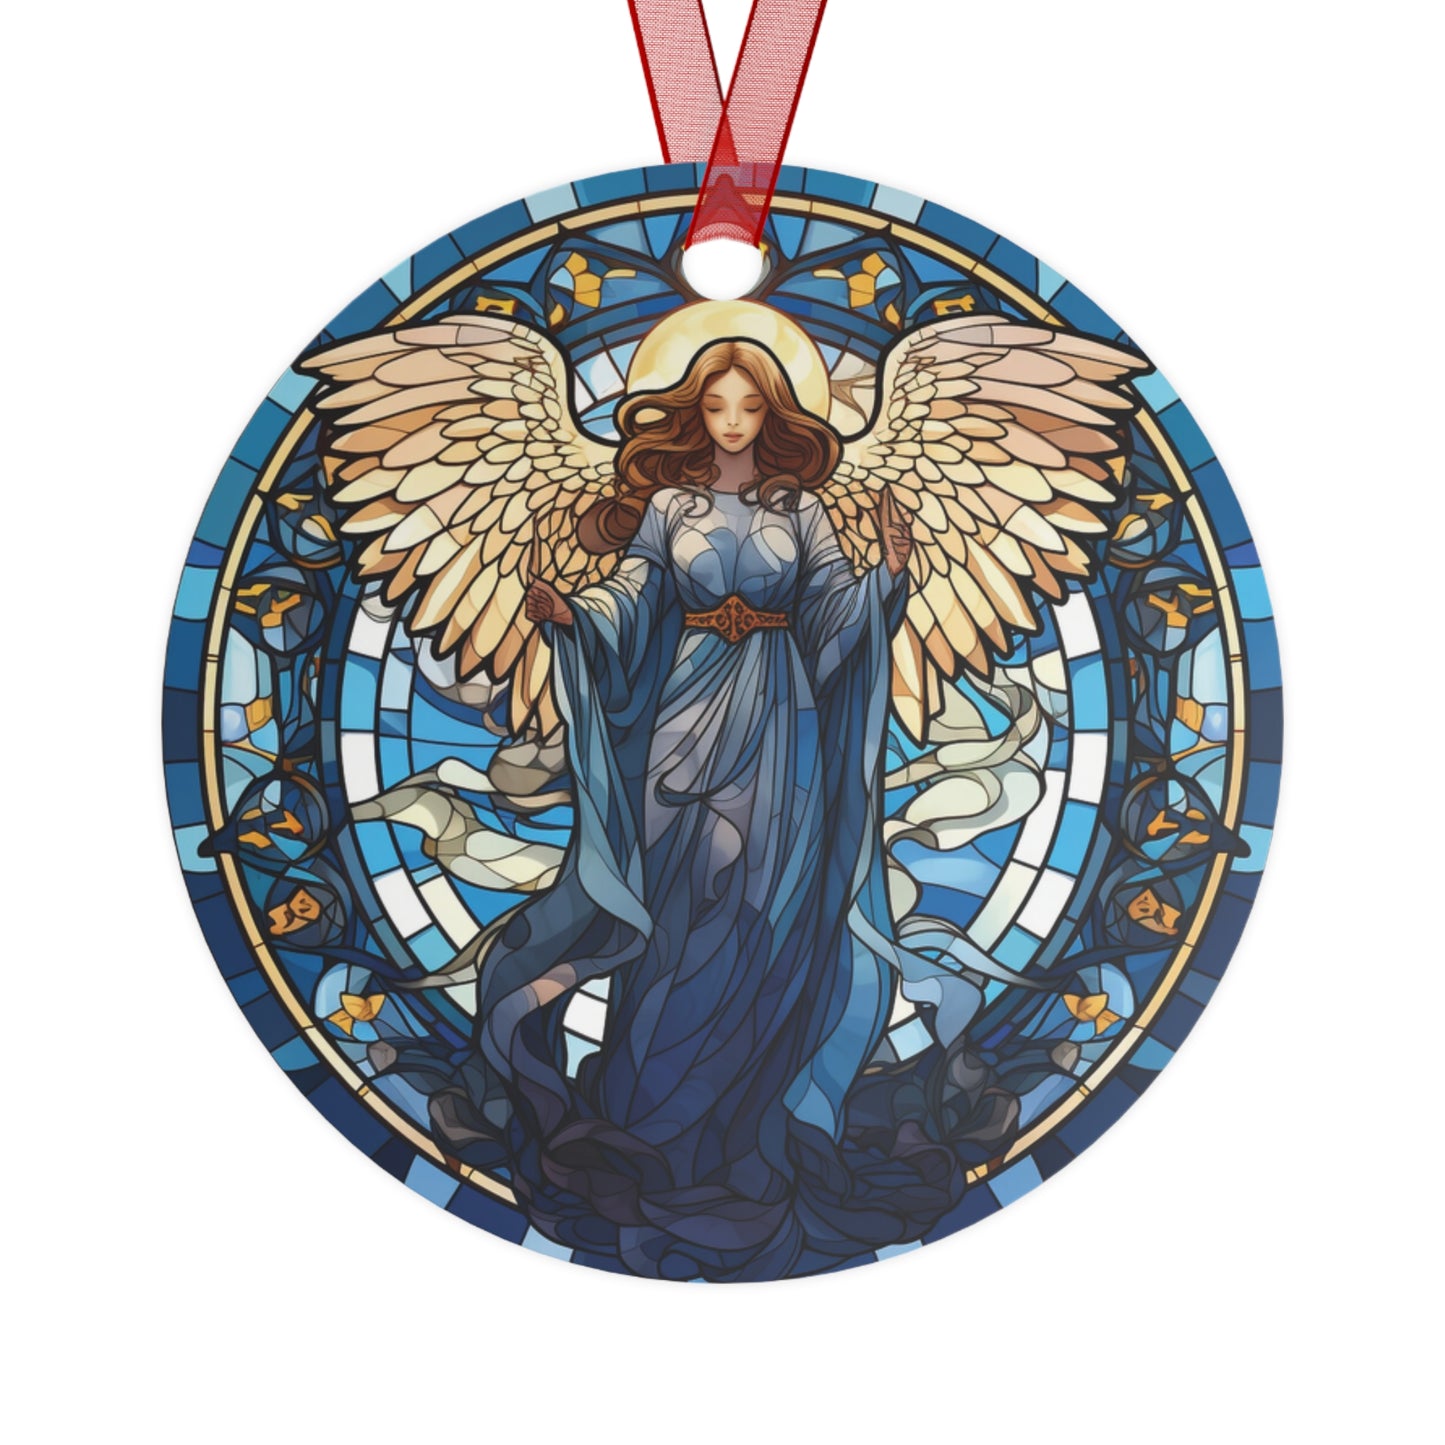 Blue Angel Stained Glass Style Ornament Lightweight Shaterproof Metal Ornaments Christmas Ornament Exchange Christmas Angel Ornament